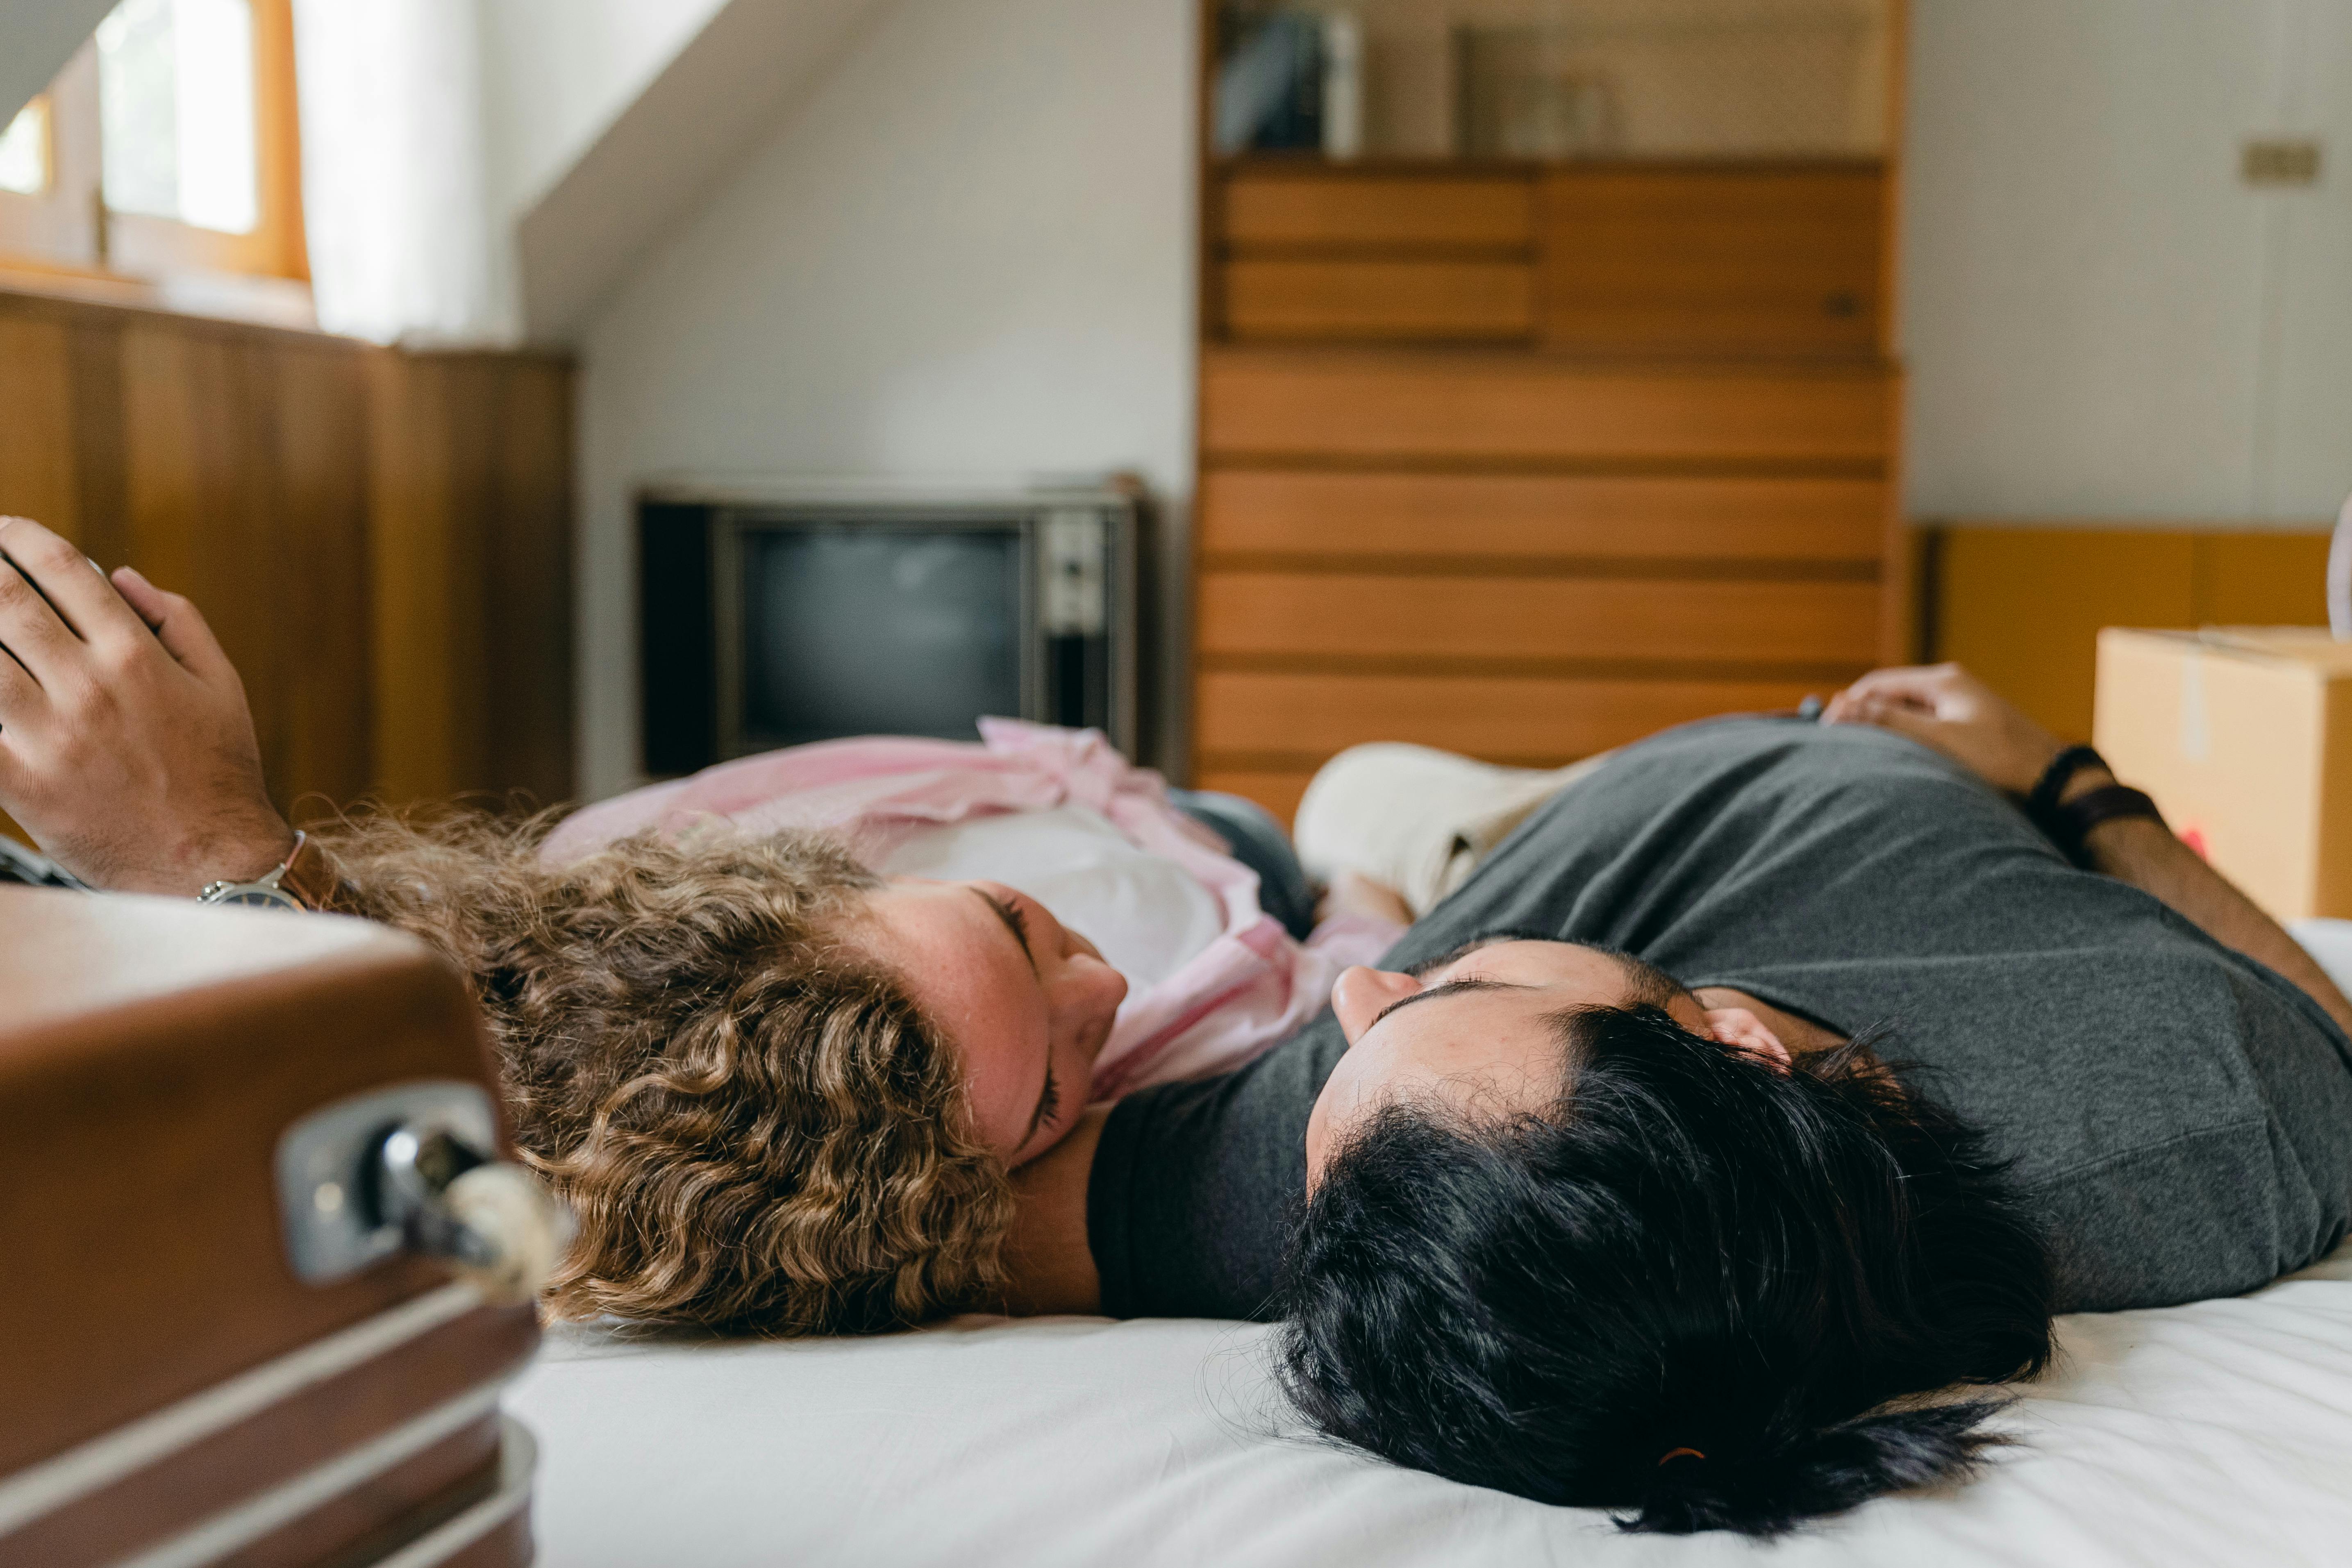 Couple lying together on the bed | Source: Pexels